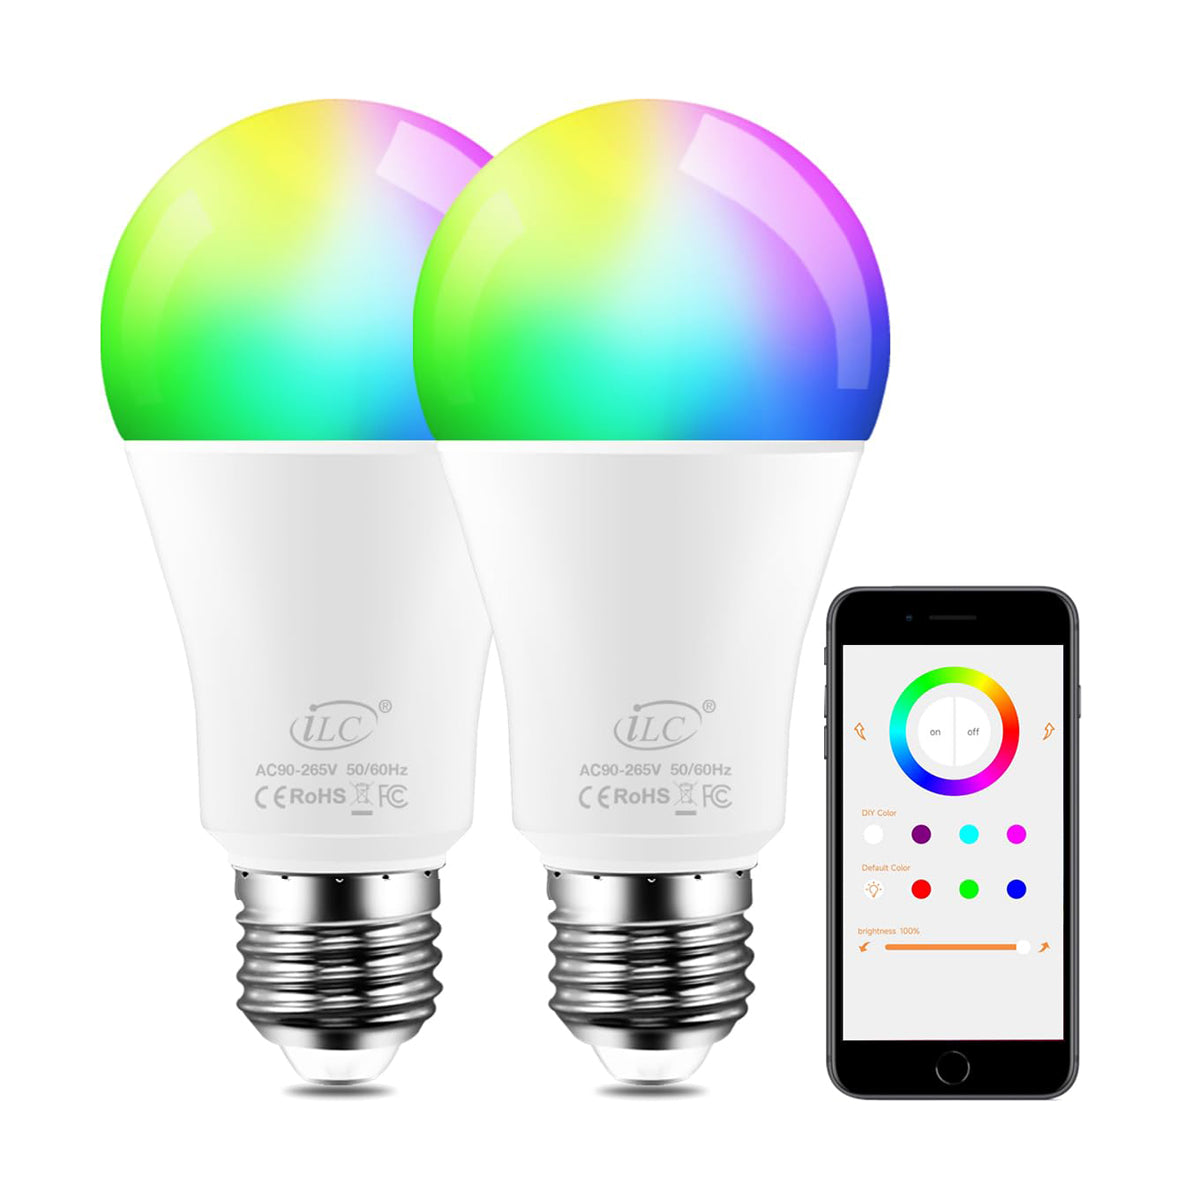 iLC Color Changing LED Light Bulb RGBW 2700K Warm White, Controlled by APP, Sync to Music, Dimmable RGB Multi-Color 70 Watt Equivalent E26 Edison Screw (2 Pack)